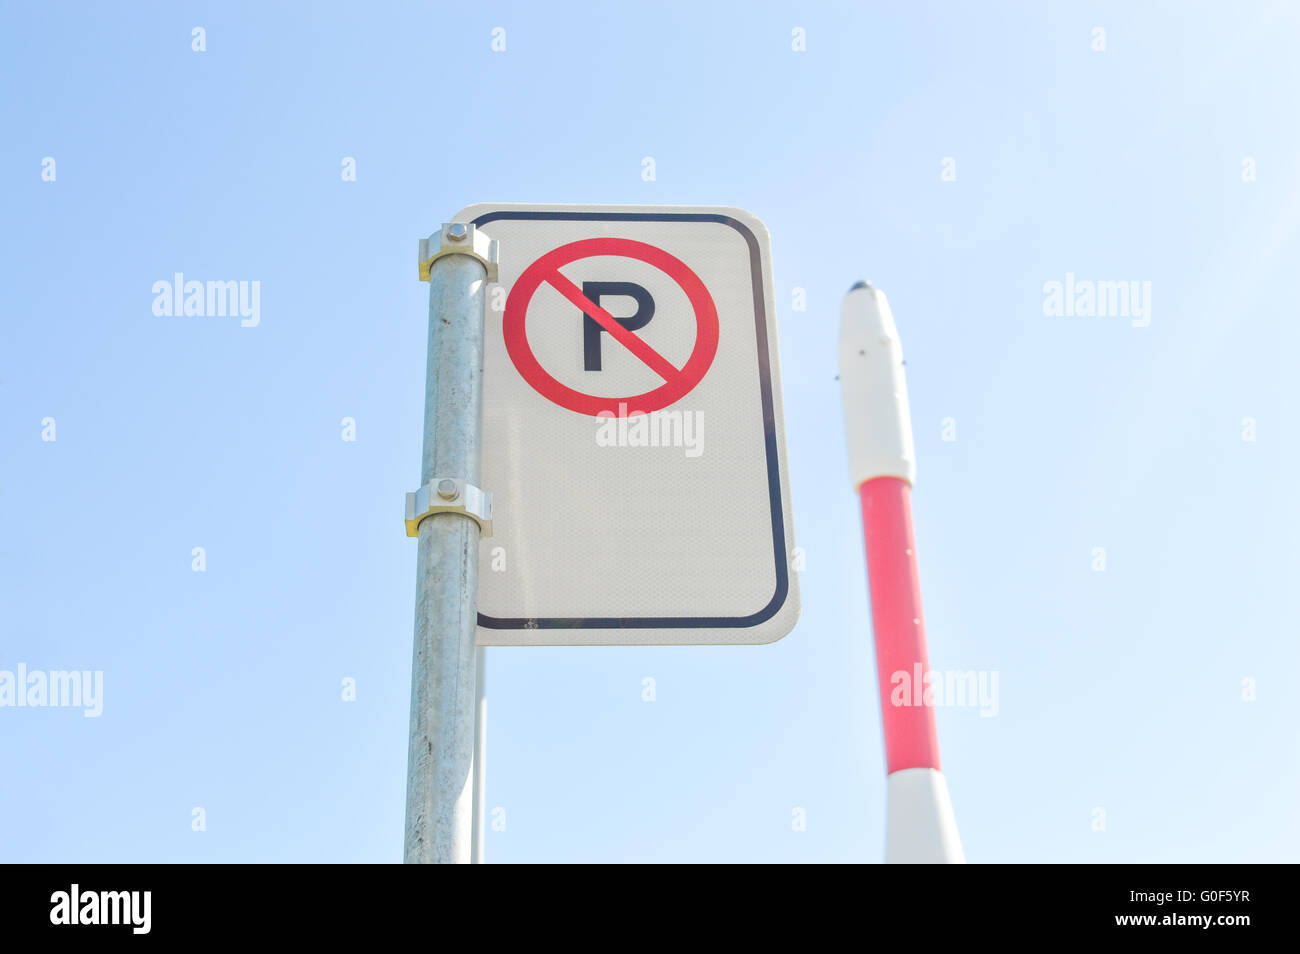 No parking sign and the rocketship Stock Photo